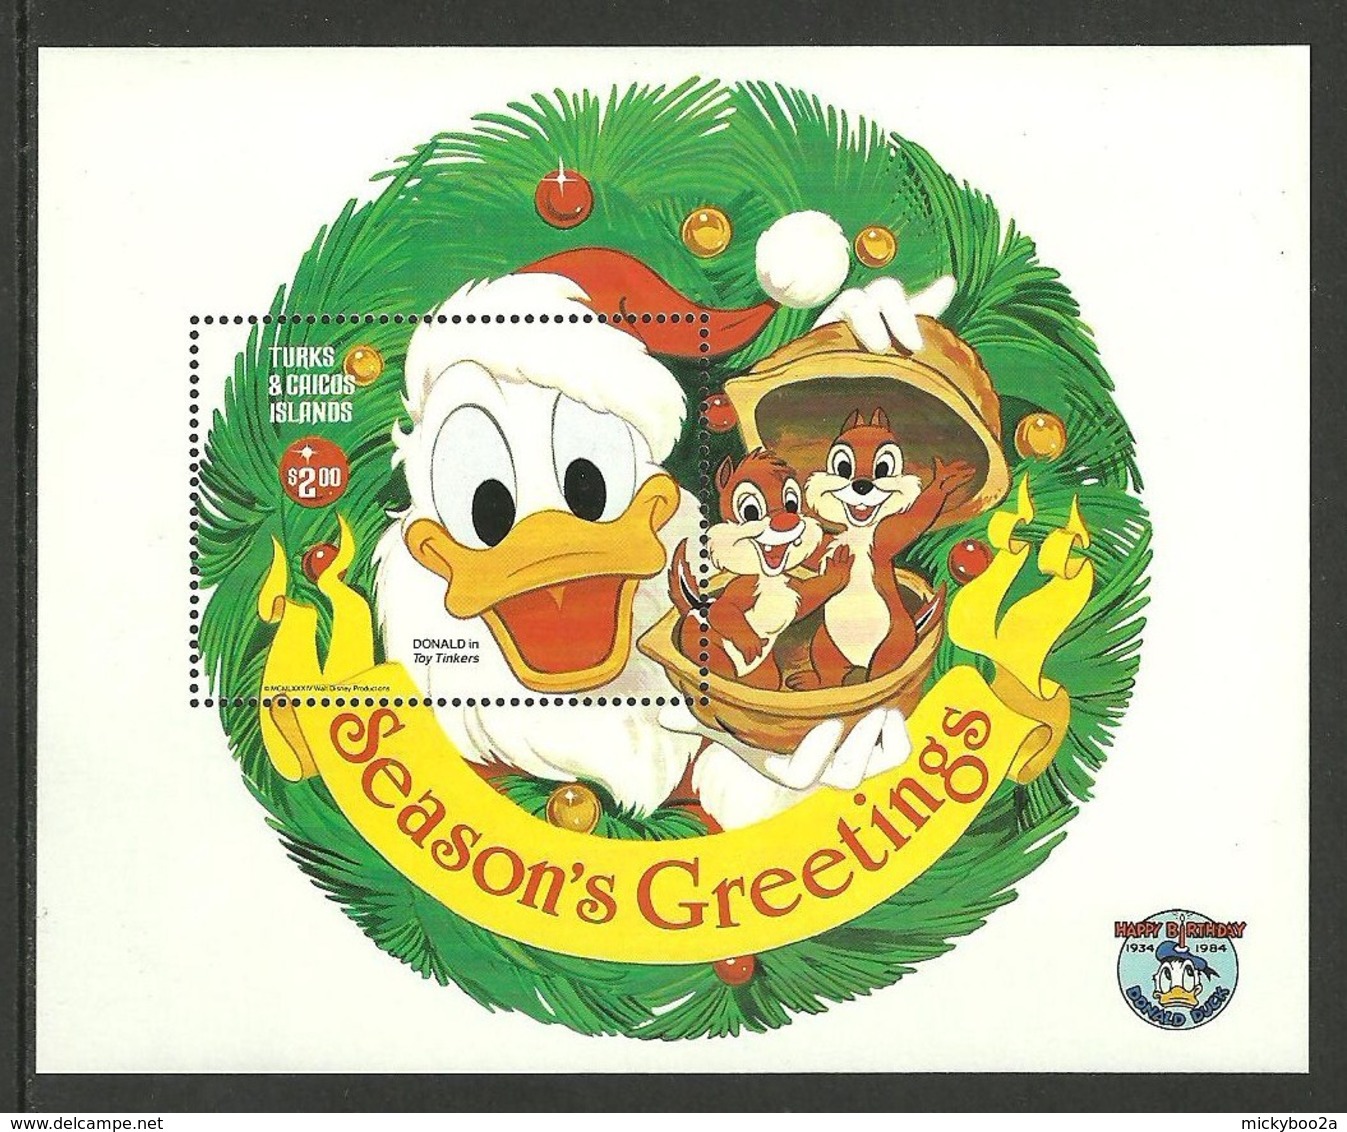 TURKS & CAICOS 1984 DISNEY DONALD DUCK CHRISTMAS CHIP N DALE M/SHEET MNH - Turks And Caicos